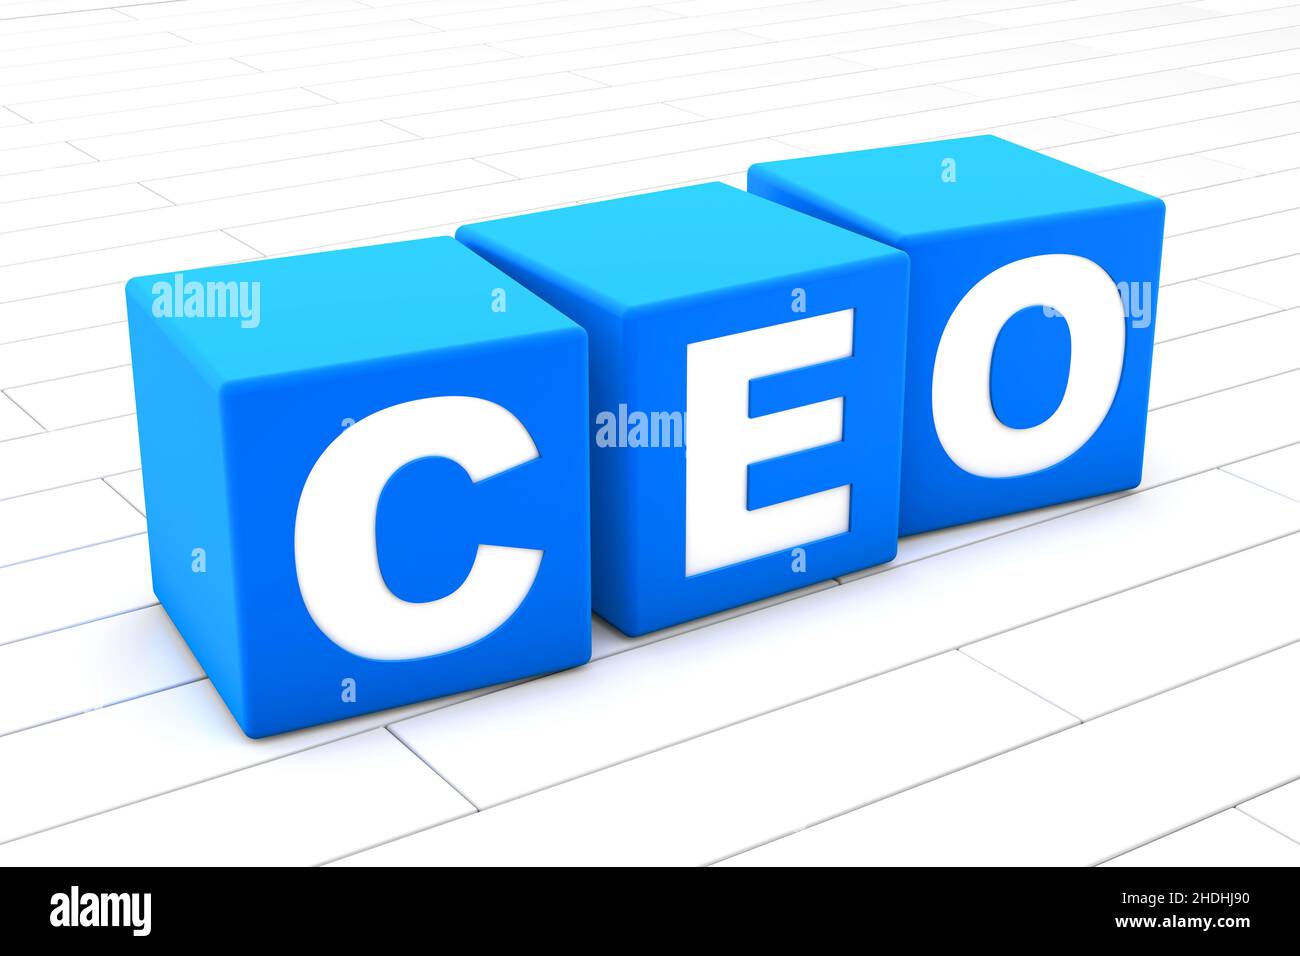 ceo, chief executive officer Stock Photo